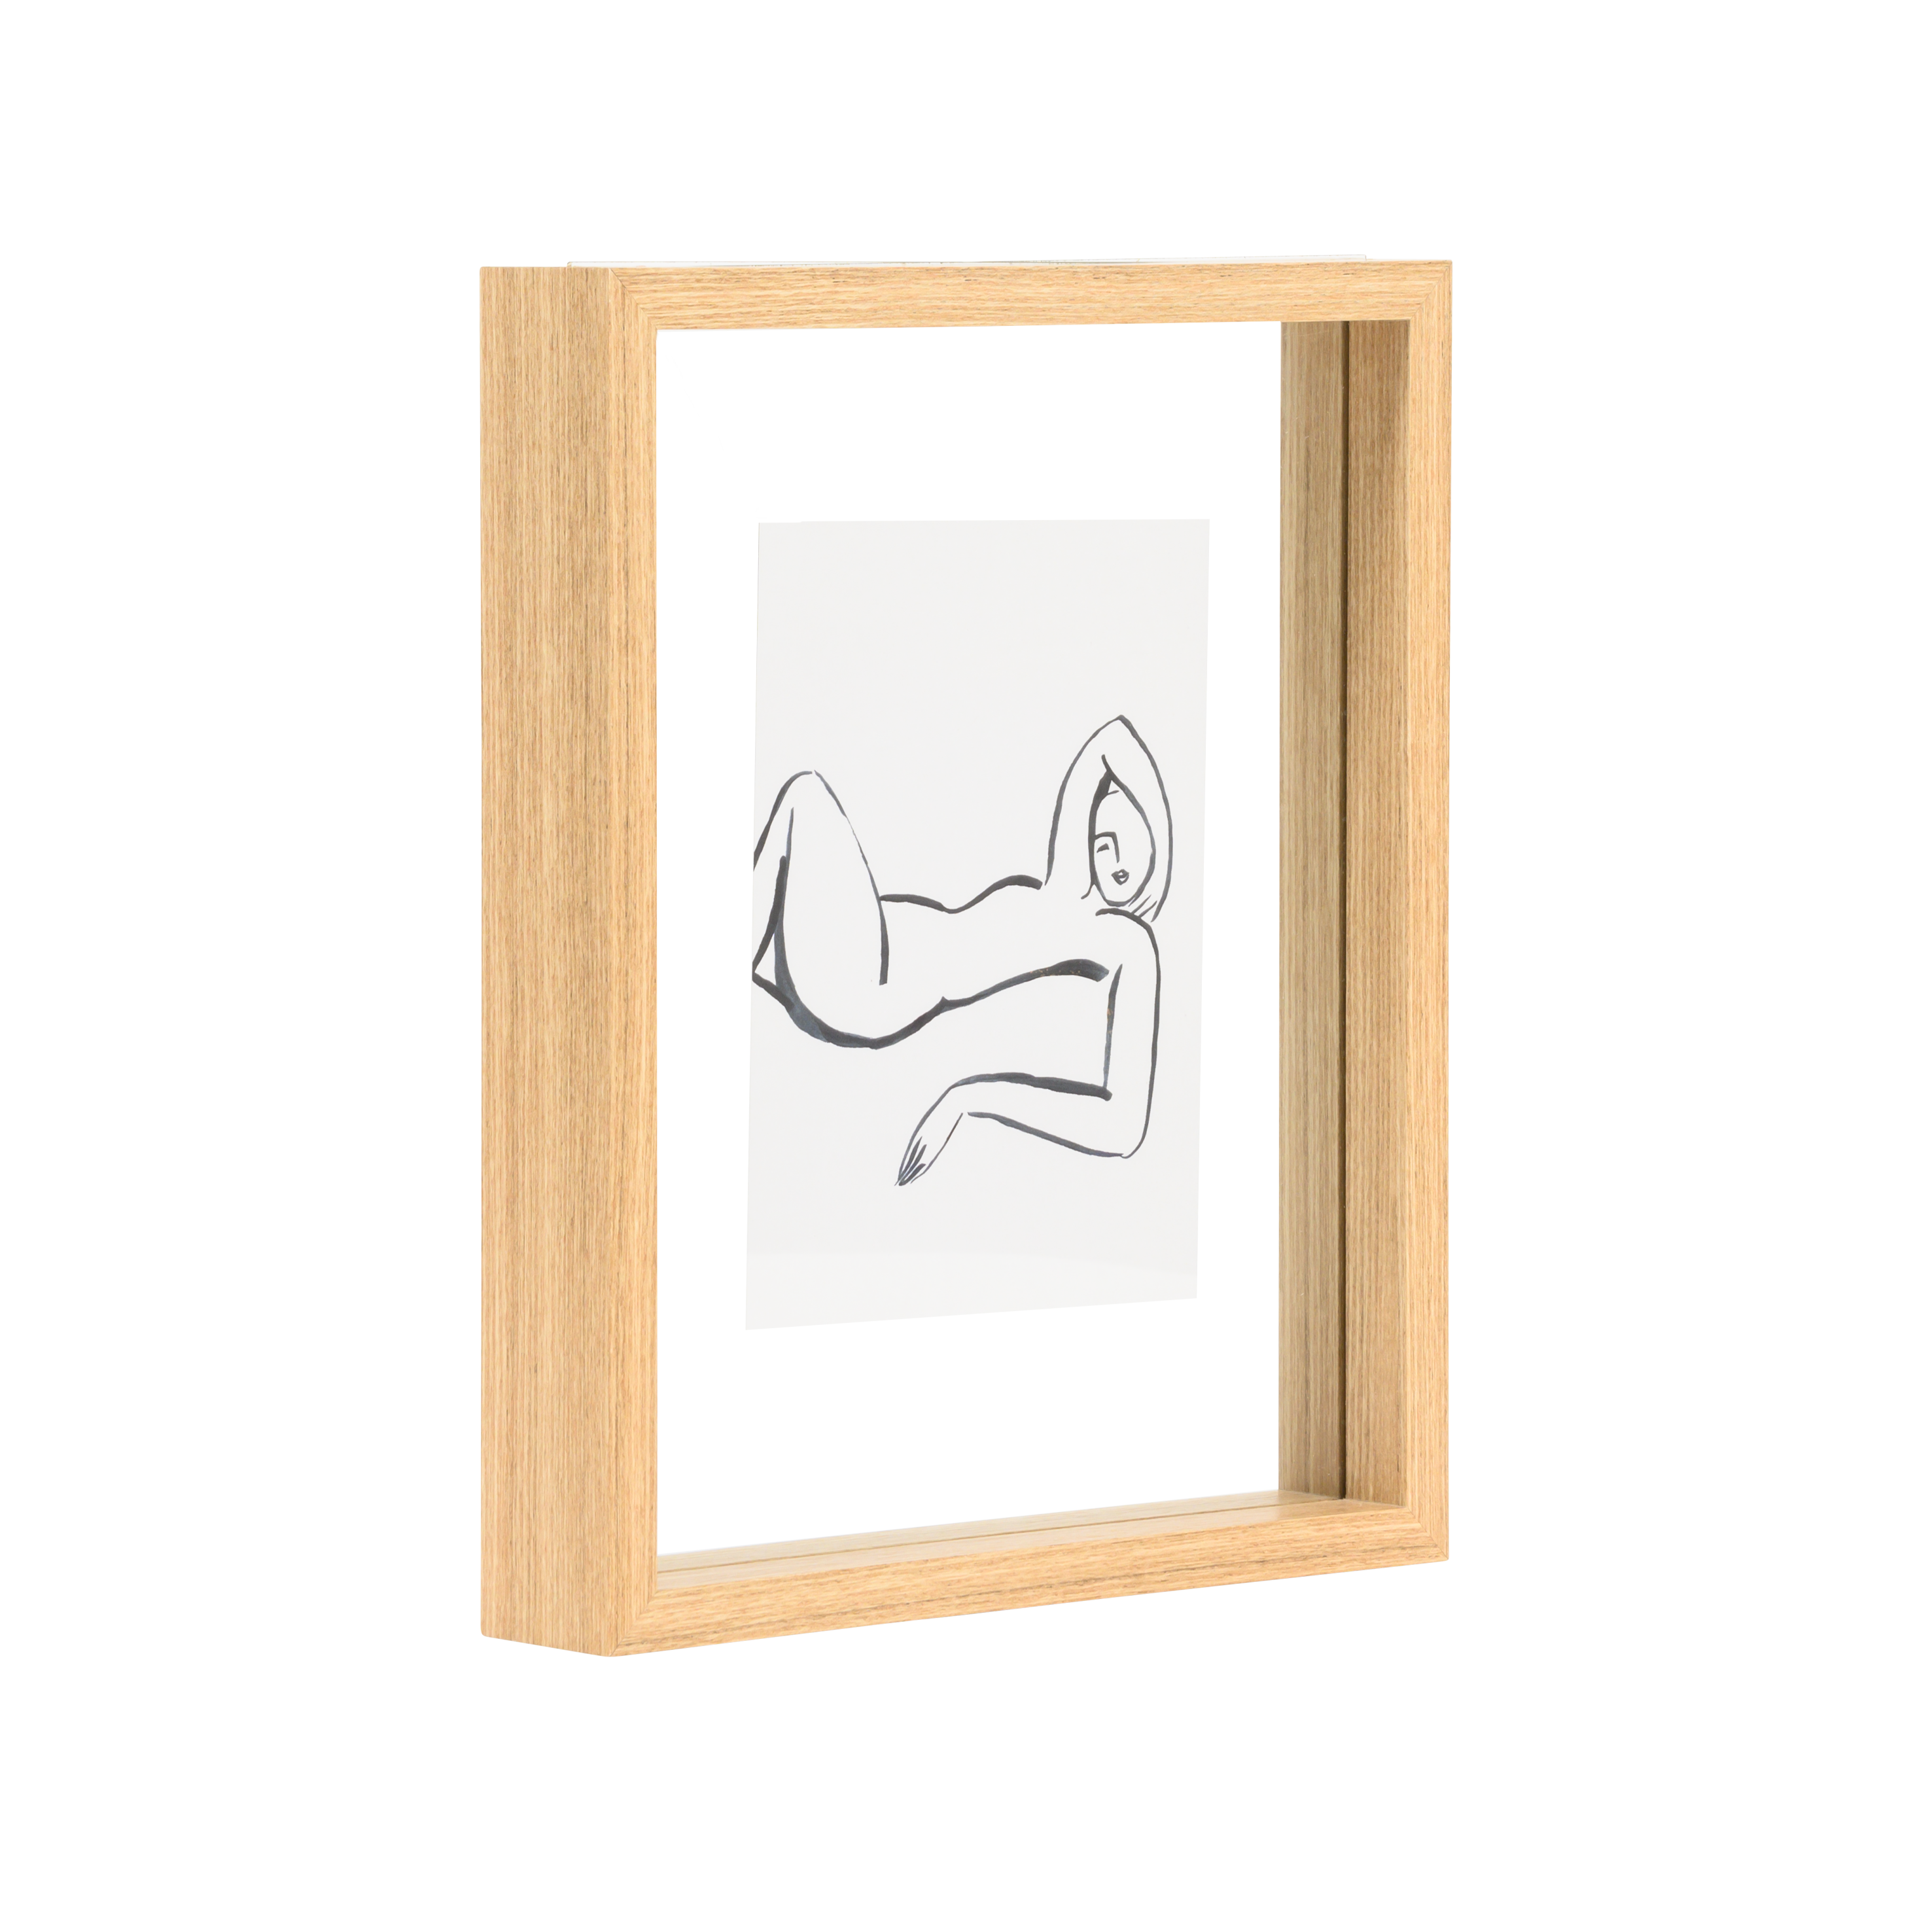 Urban Nature Culture photo frame Floating Aesthetic natural_M